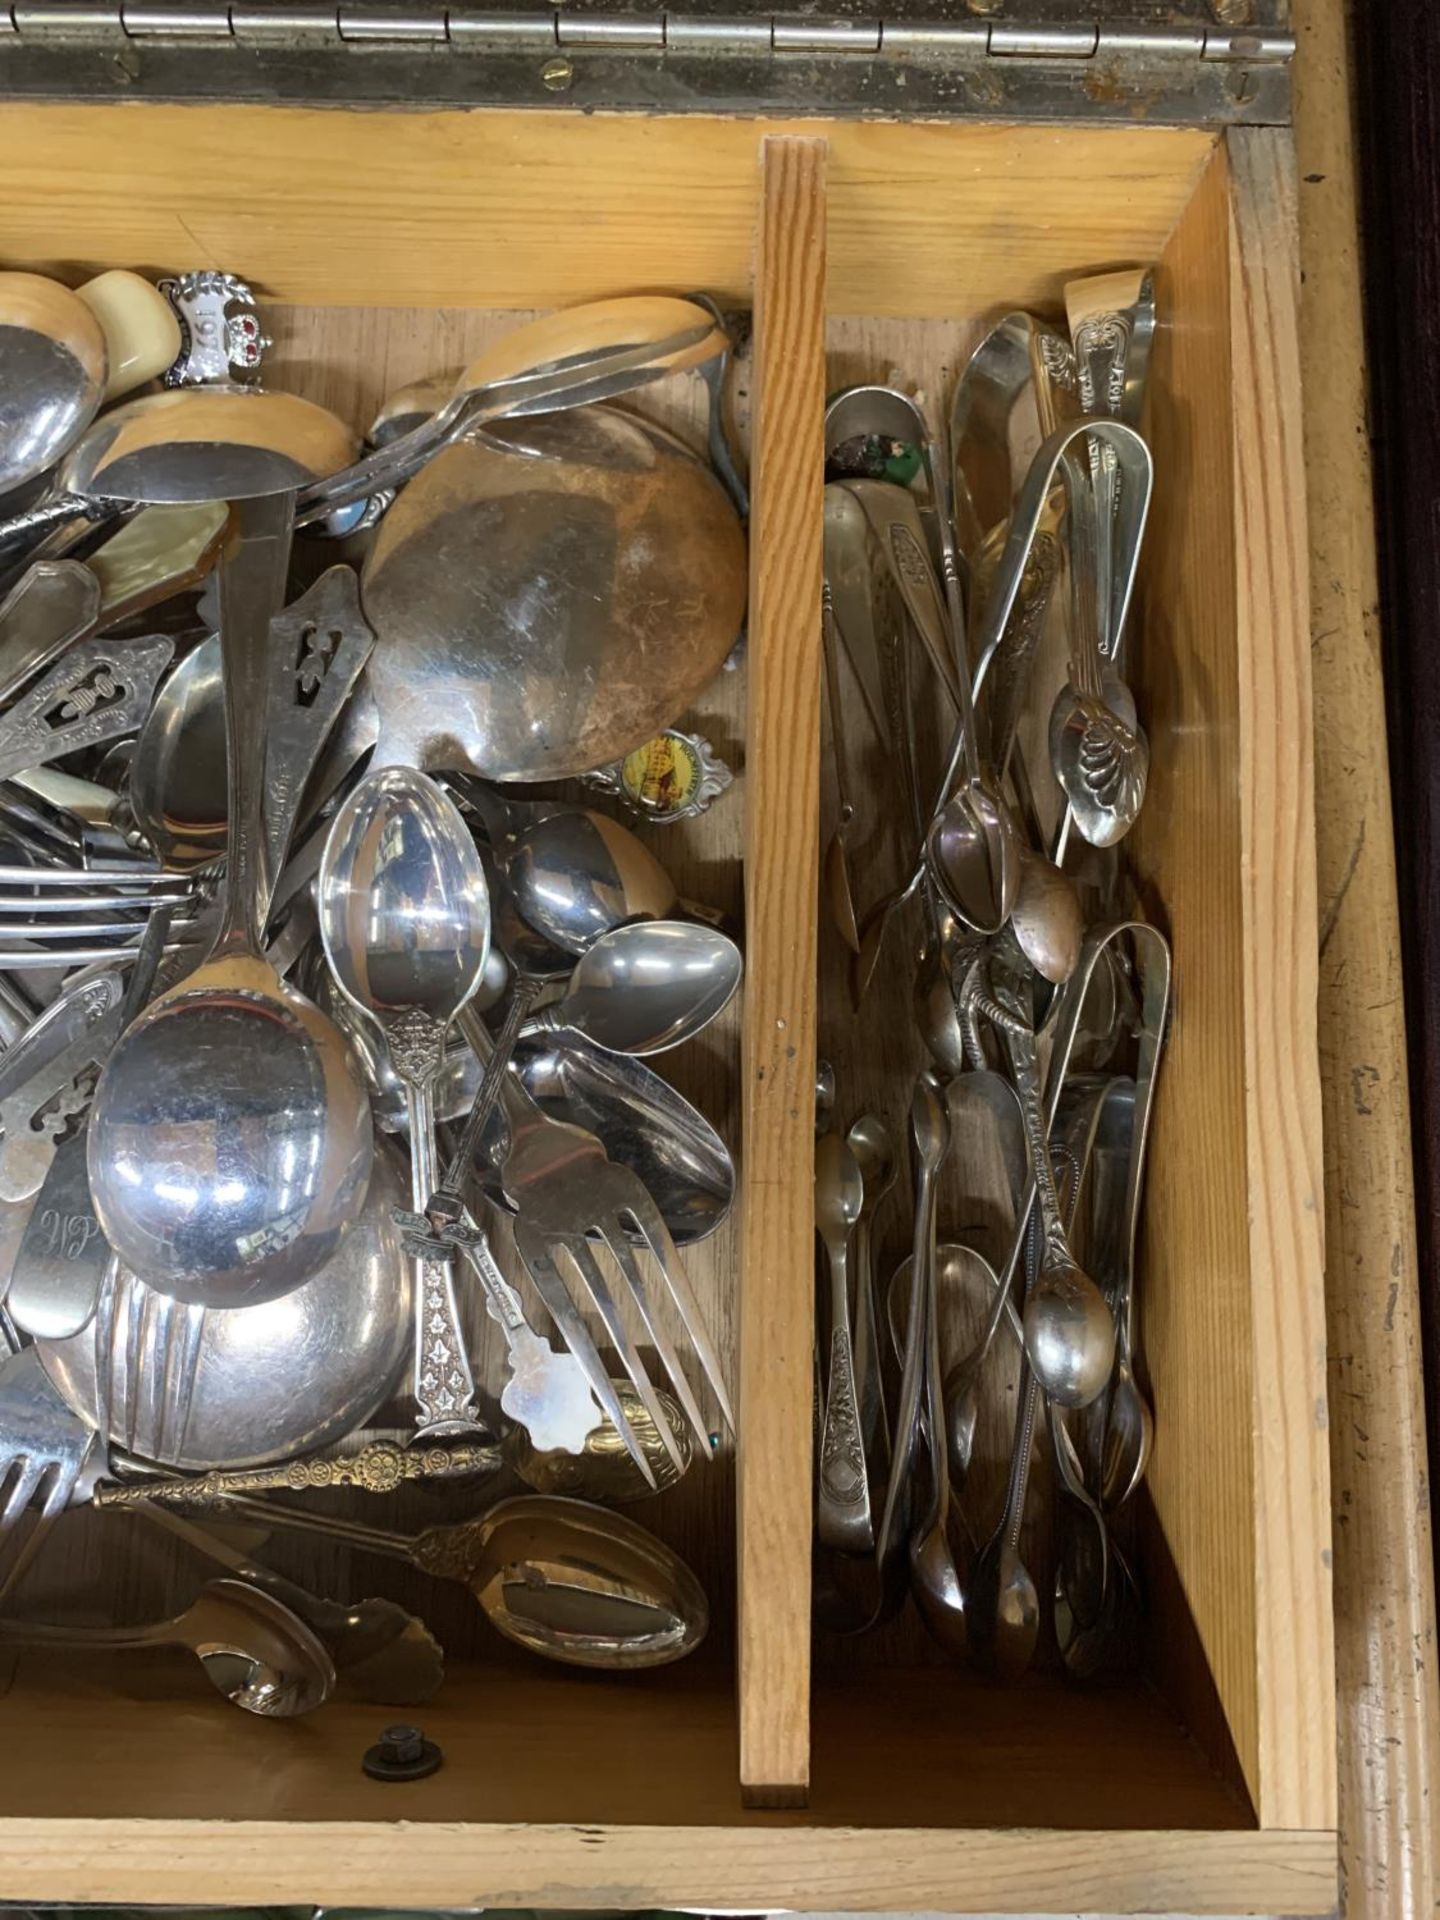 A QUANTITY OF VINTAGE FLATWARE TO INCLUDE A LARGE AMOUNT OF SUGAR TONGS, IN A WOODEN BOX - Image 4 of 4